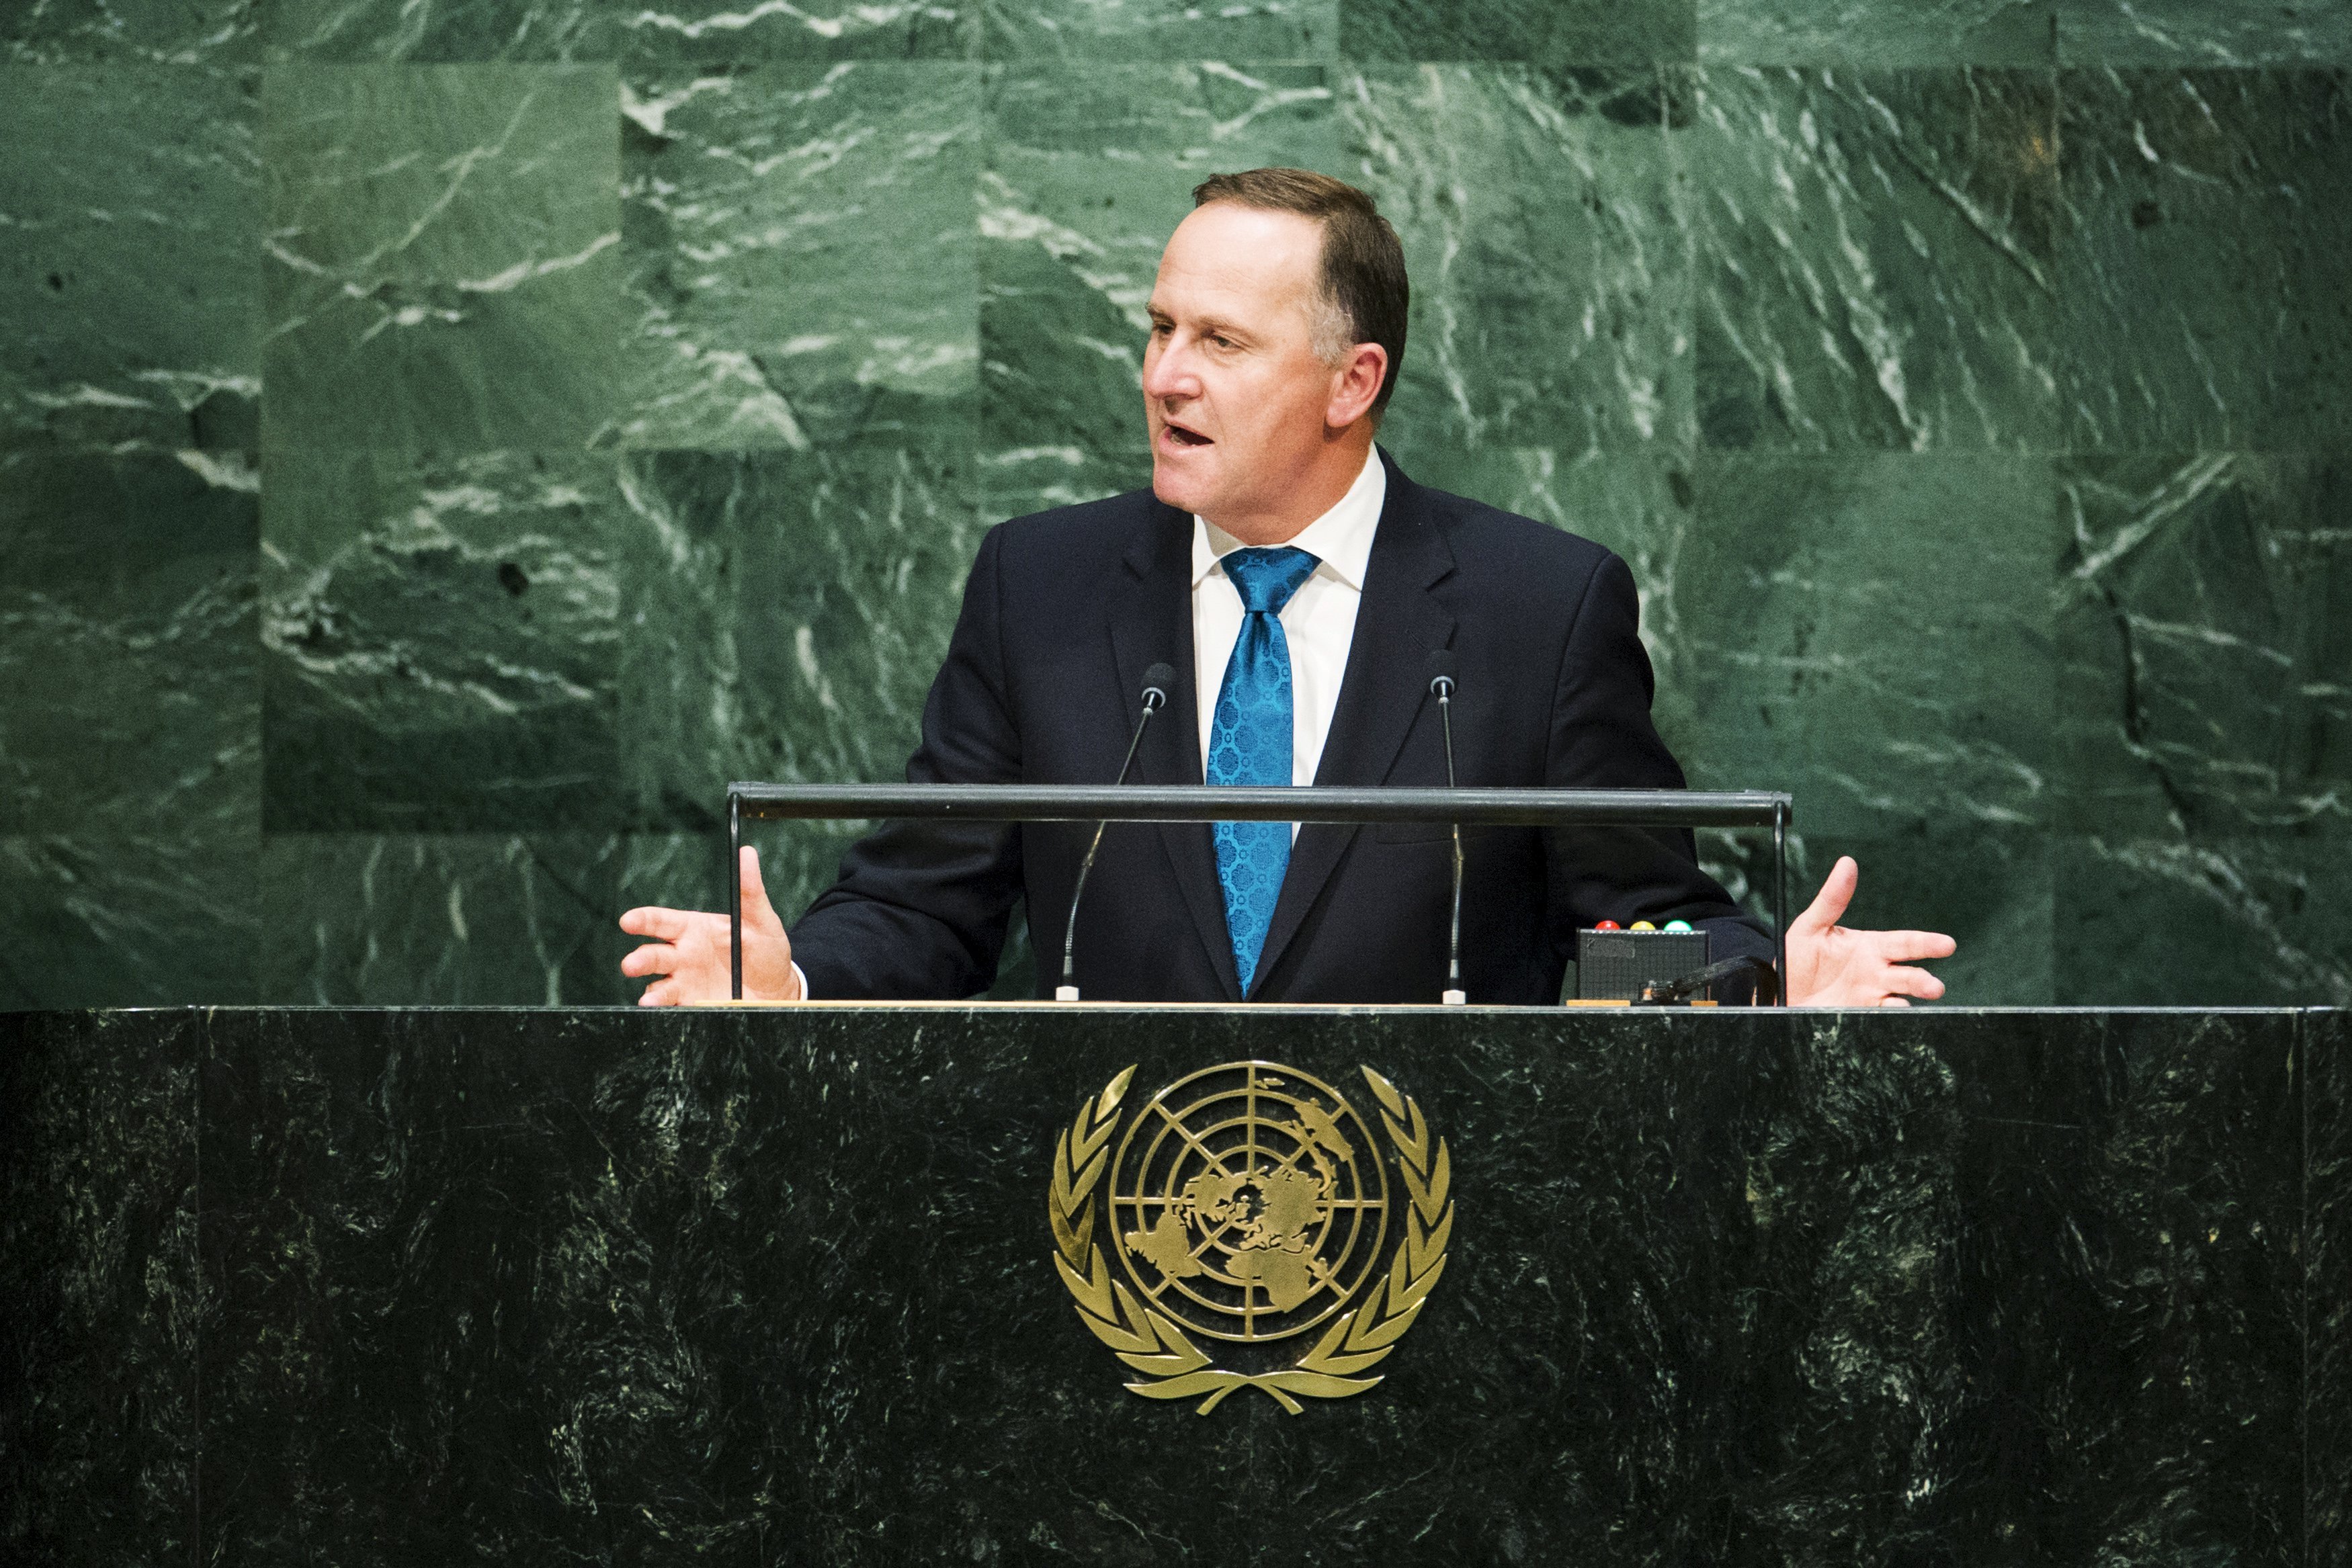 New Zealand's Prime Minister Key addresses attendees during the 70th session of the United Nations General Assembly at the U.N. Headquarters in New York